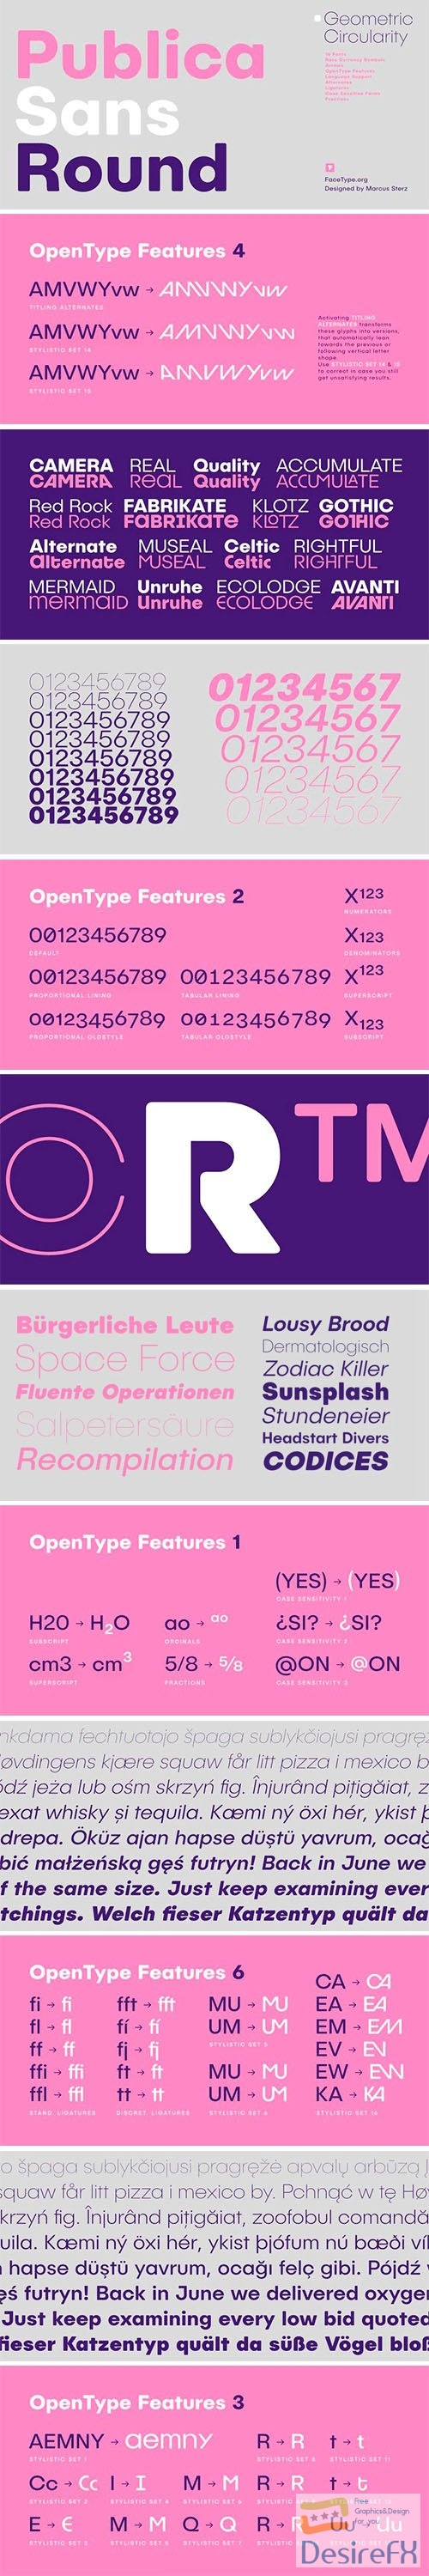 Publica Sans Round Font Family 16-Weights